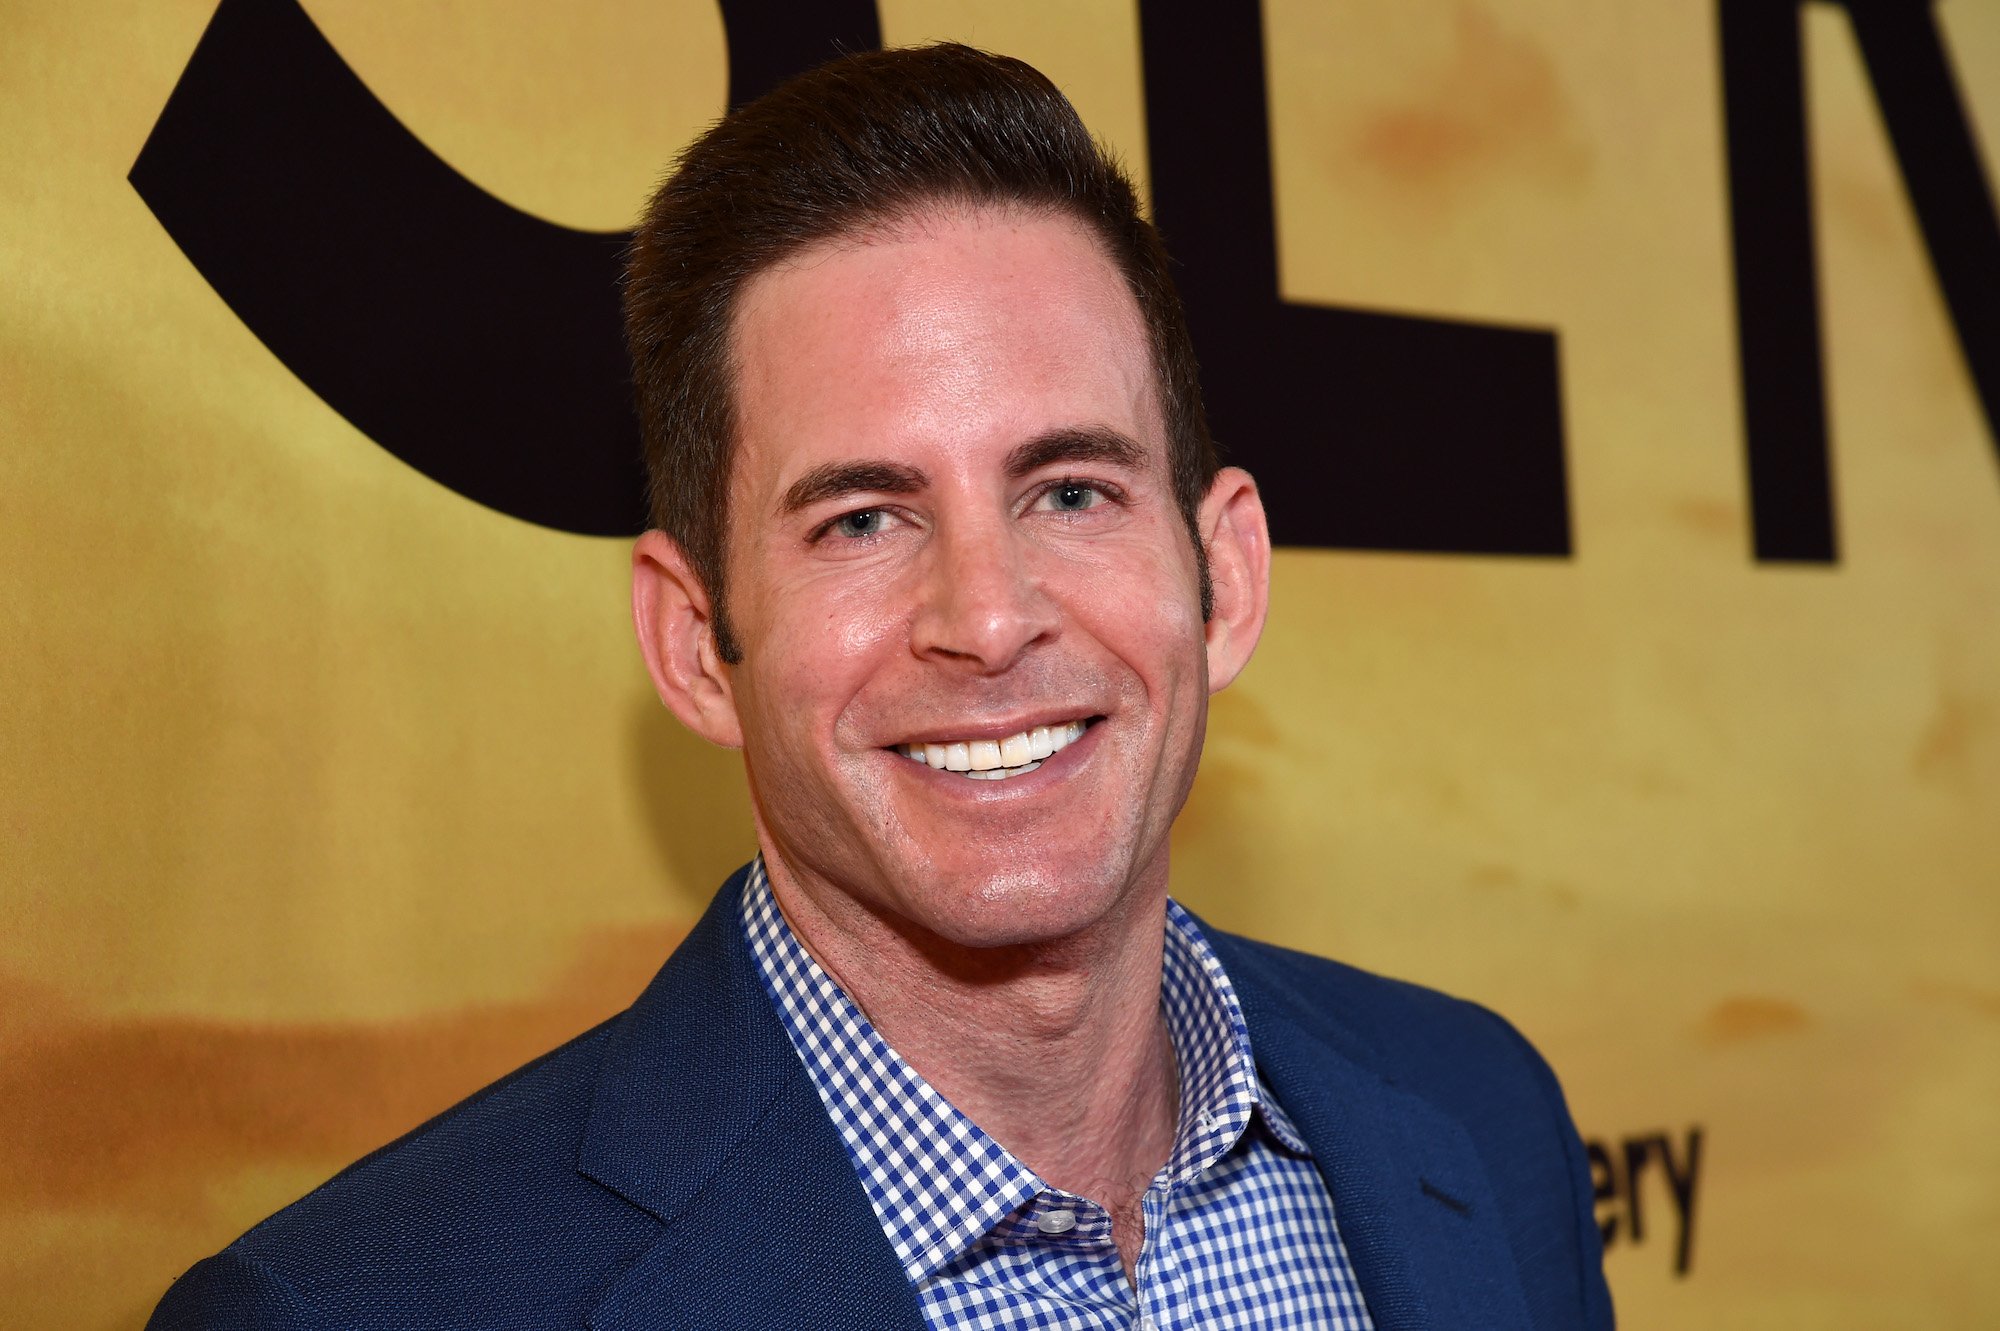 Tarek El Moussa smiling in front of a yellow background